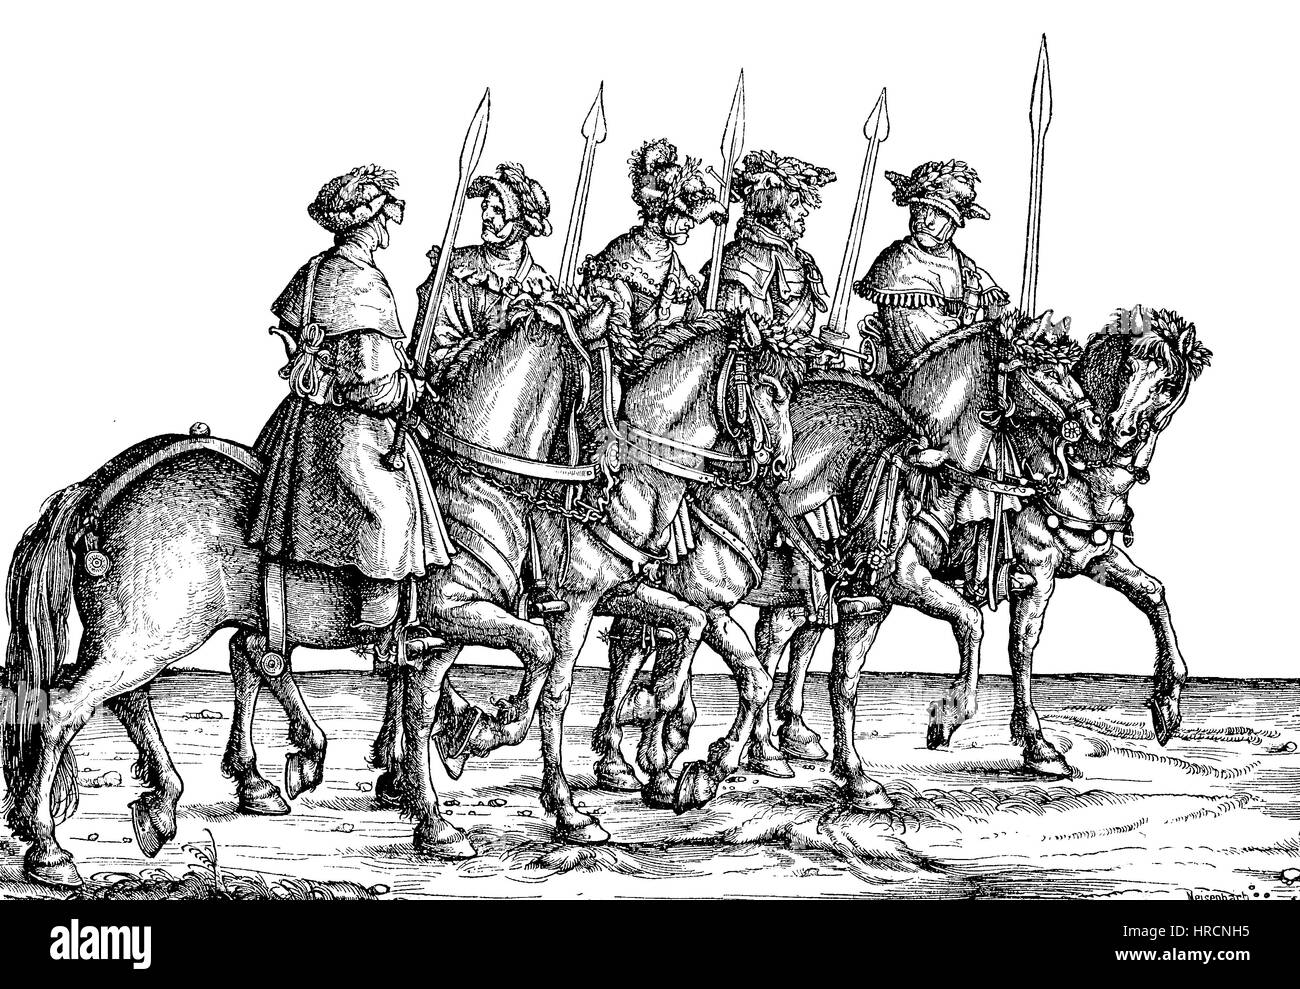 Blackwild hunter, Group of Maximilians I. Hunting, facsimile from Hans Burgkmair Woodcut: The Triumphal Procession, Triumphzug, or Triumphs of Maximilian is a monumental 16th-century , reproduction of an woodcut from the 19th century, 1885 Stock Photo